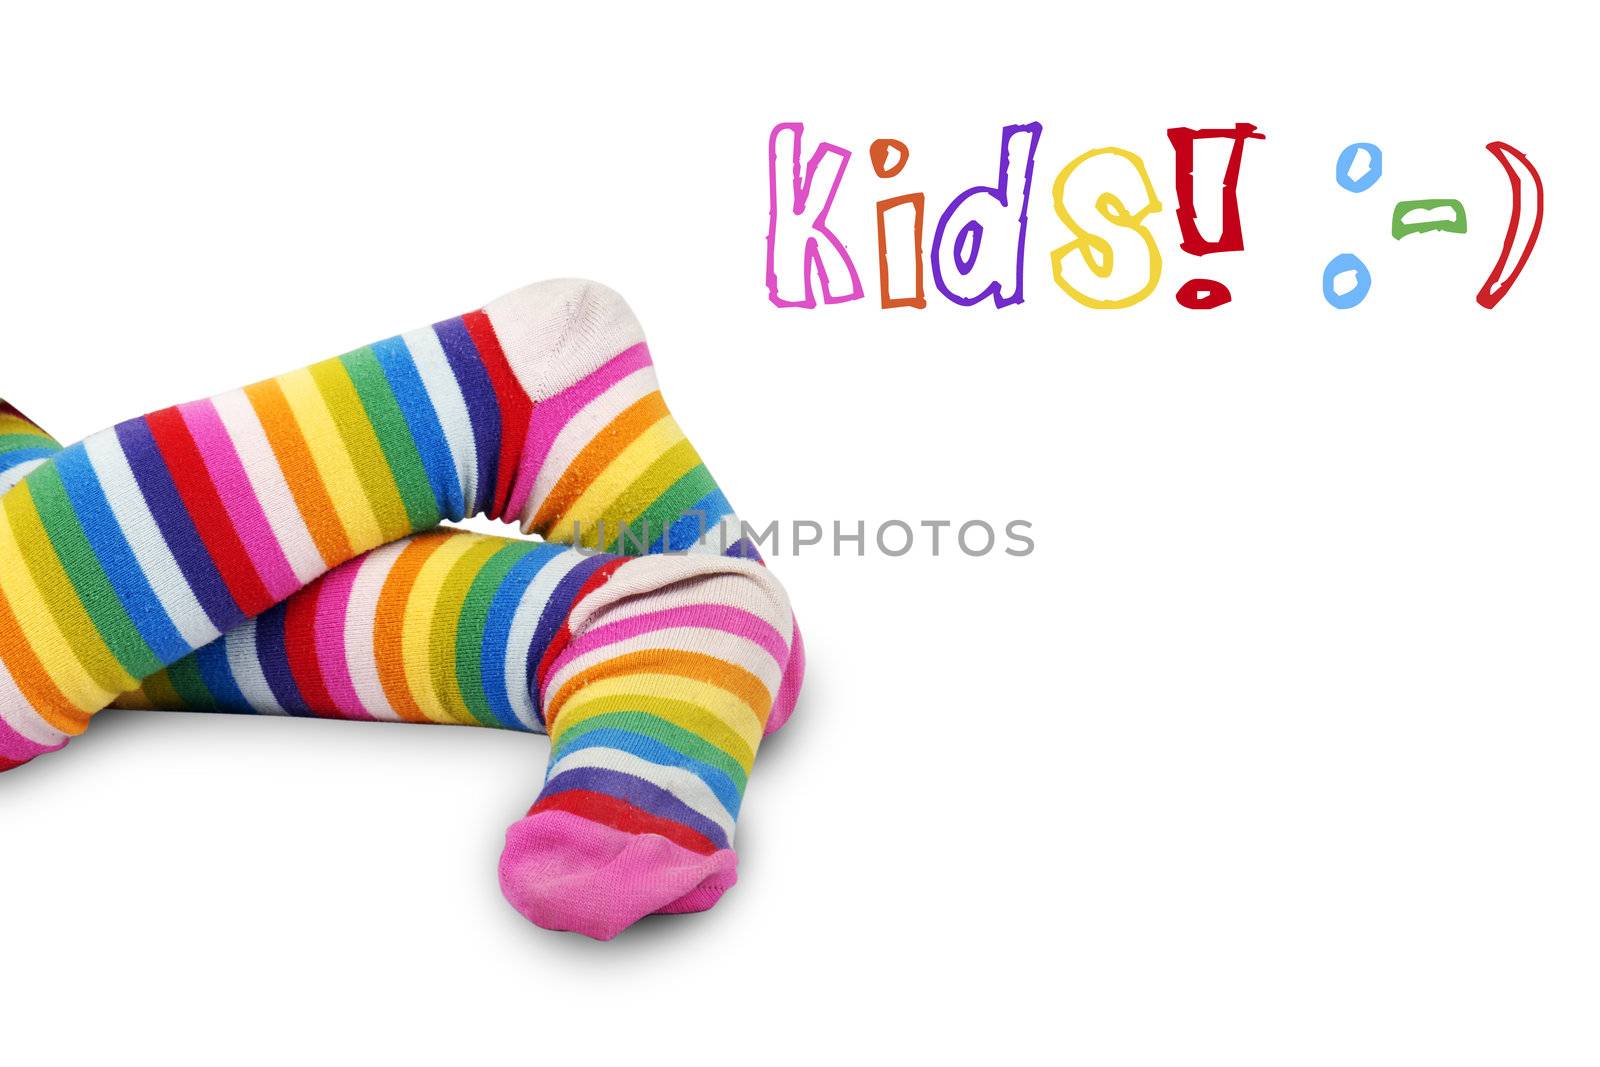 Colorful kid's feet by Mirage3